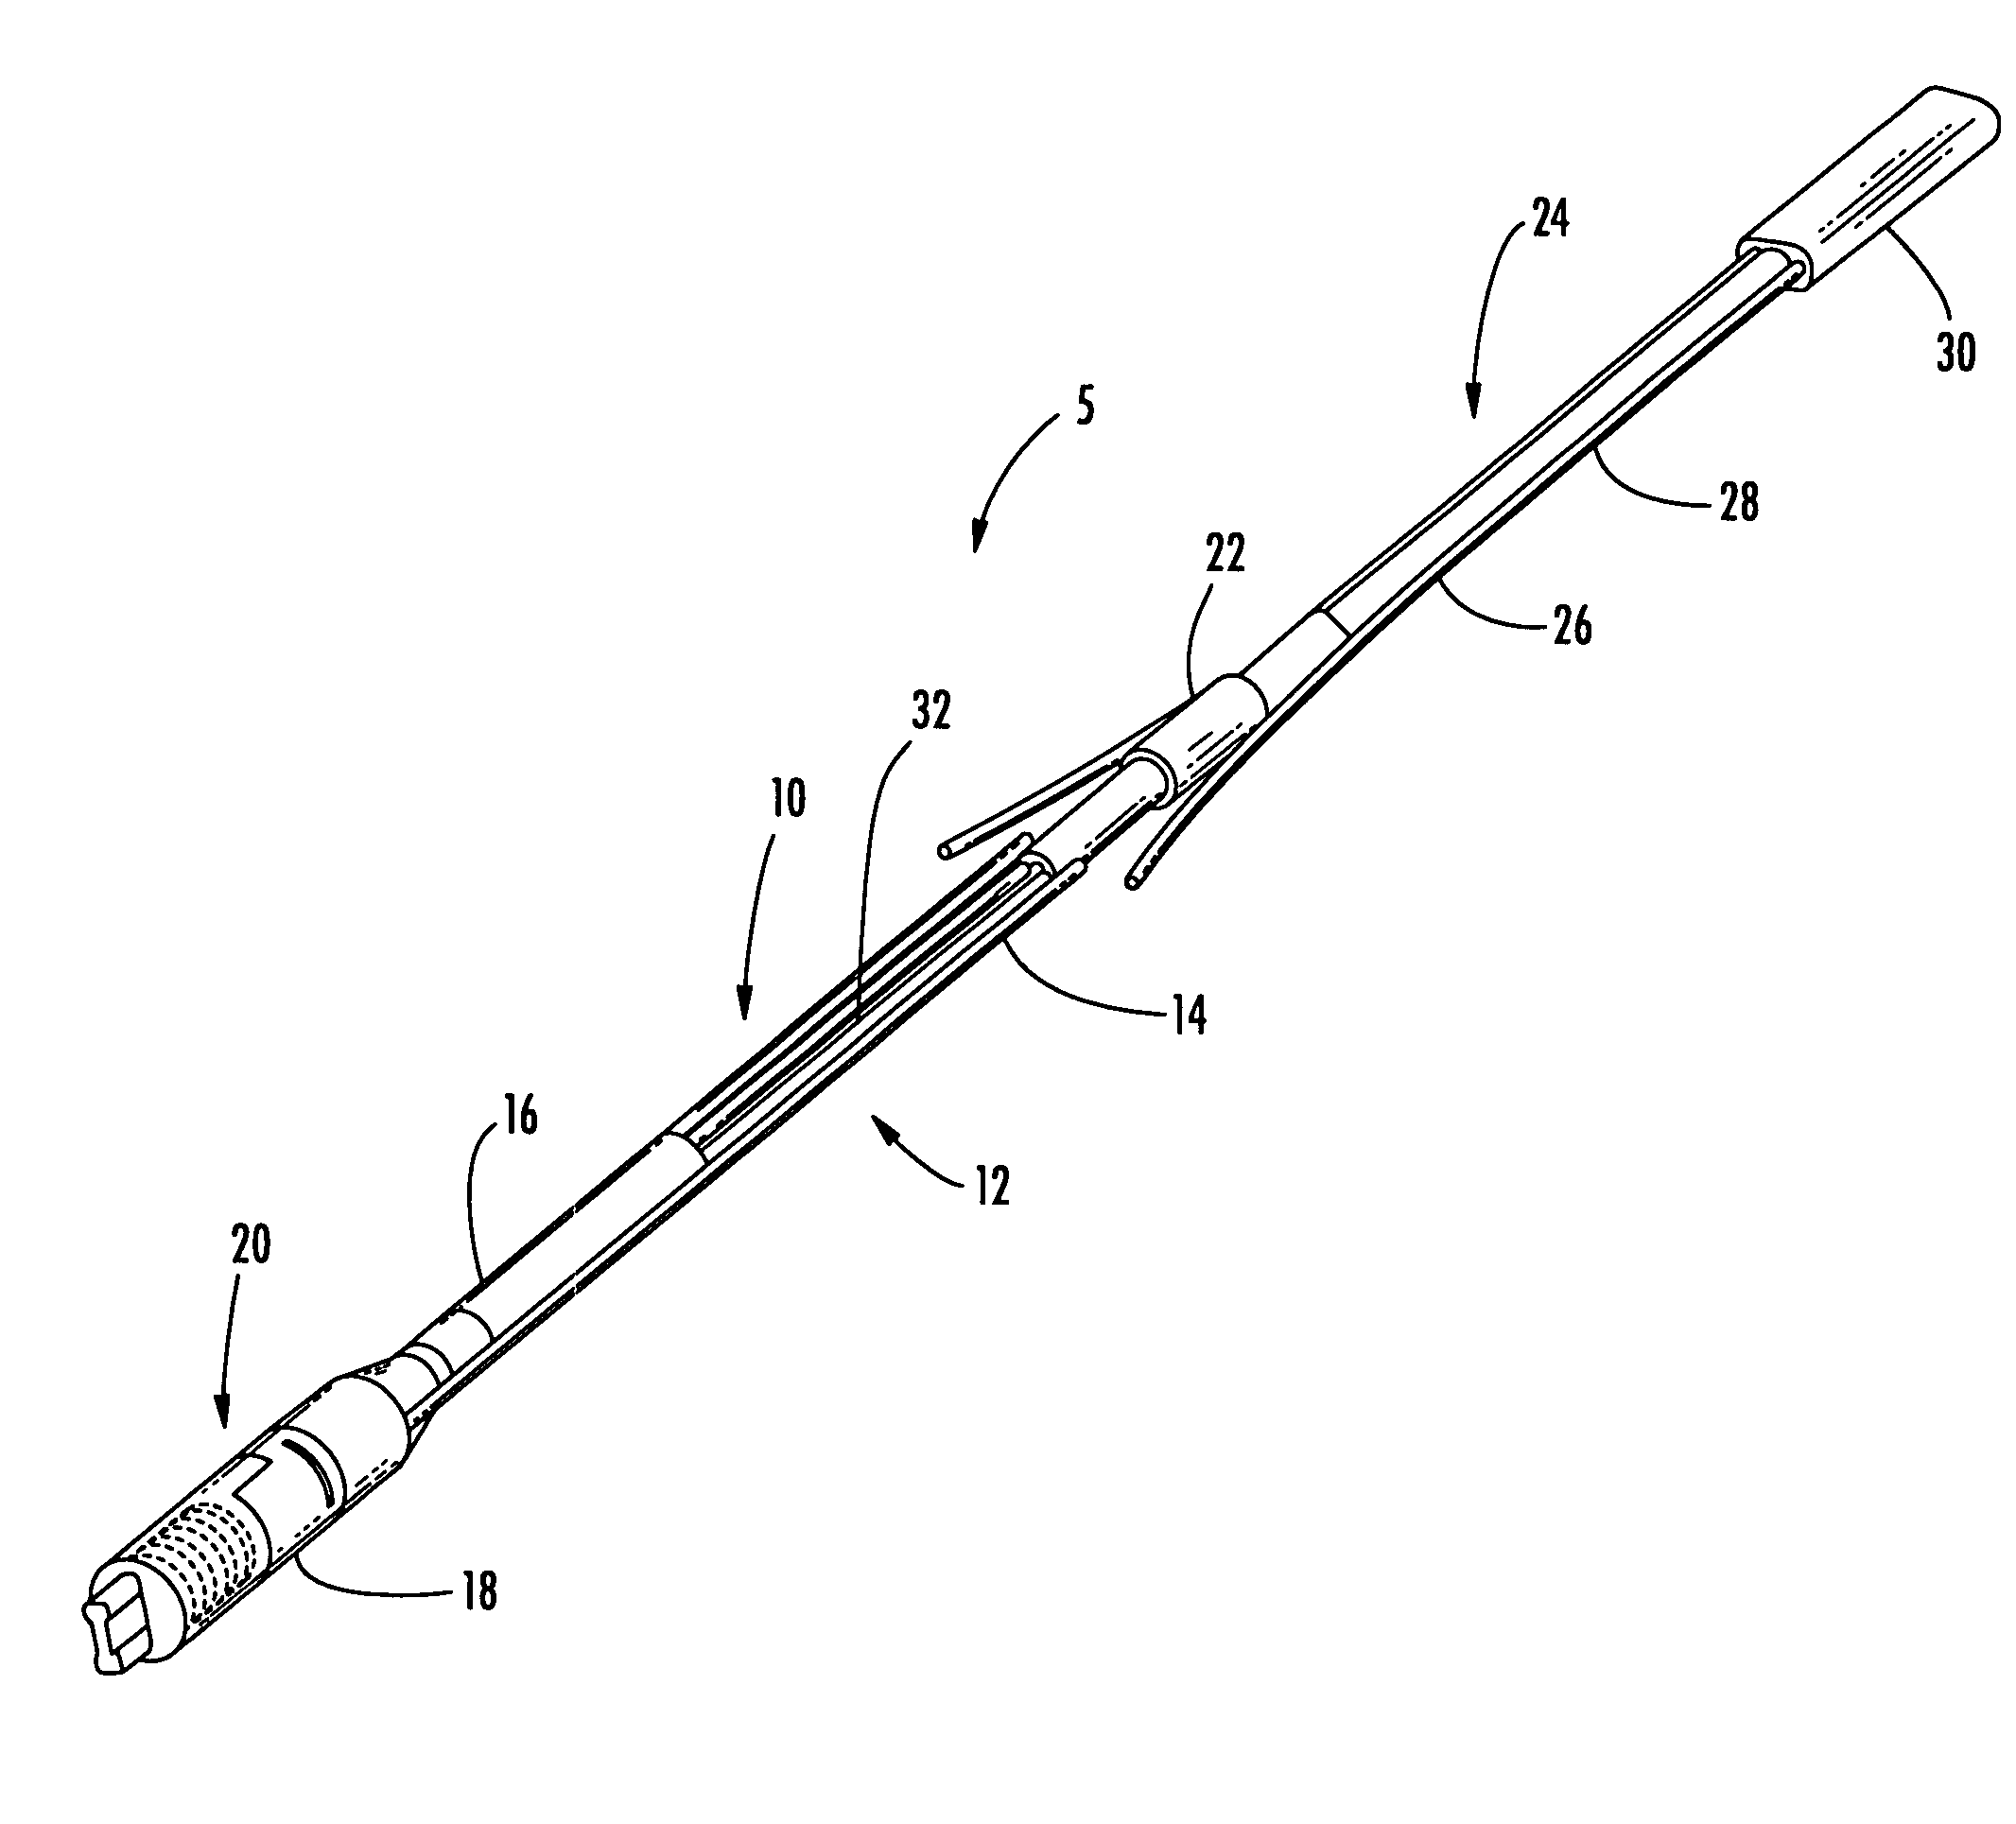 Drop cable with fiber optic connector and methods for fabricating same